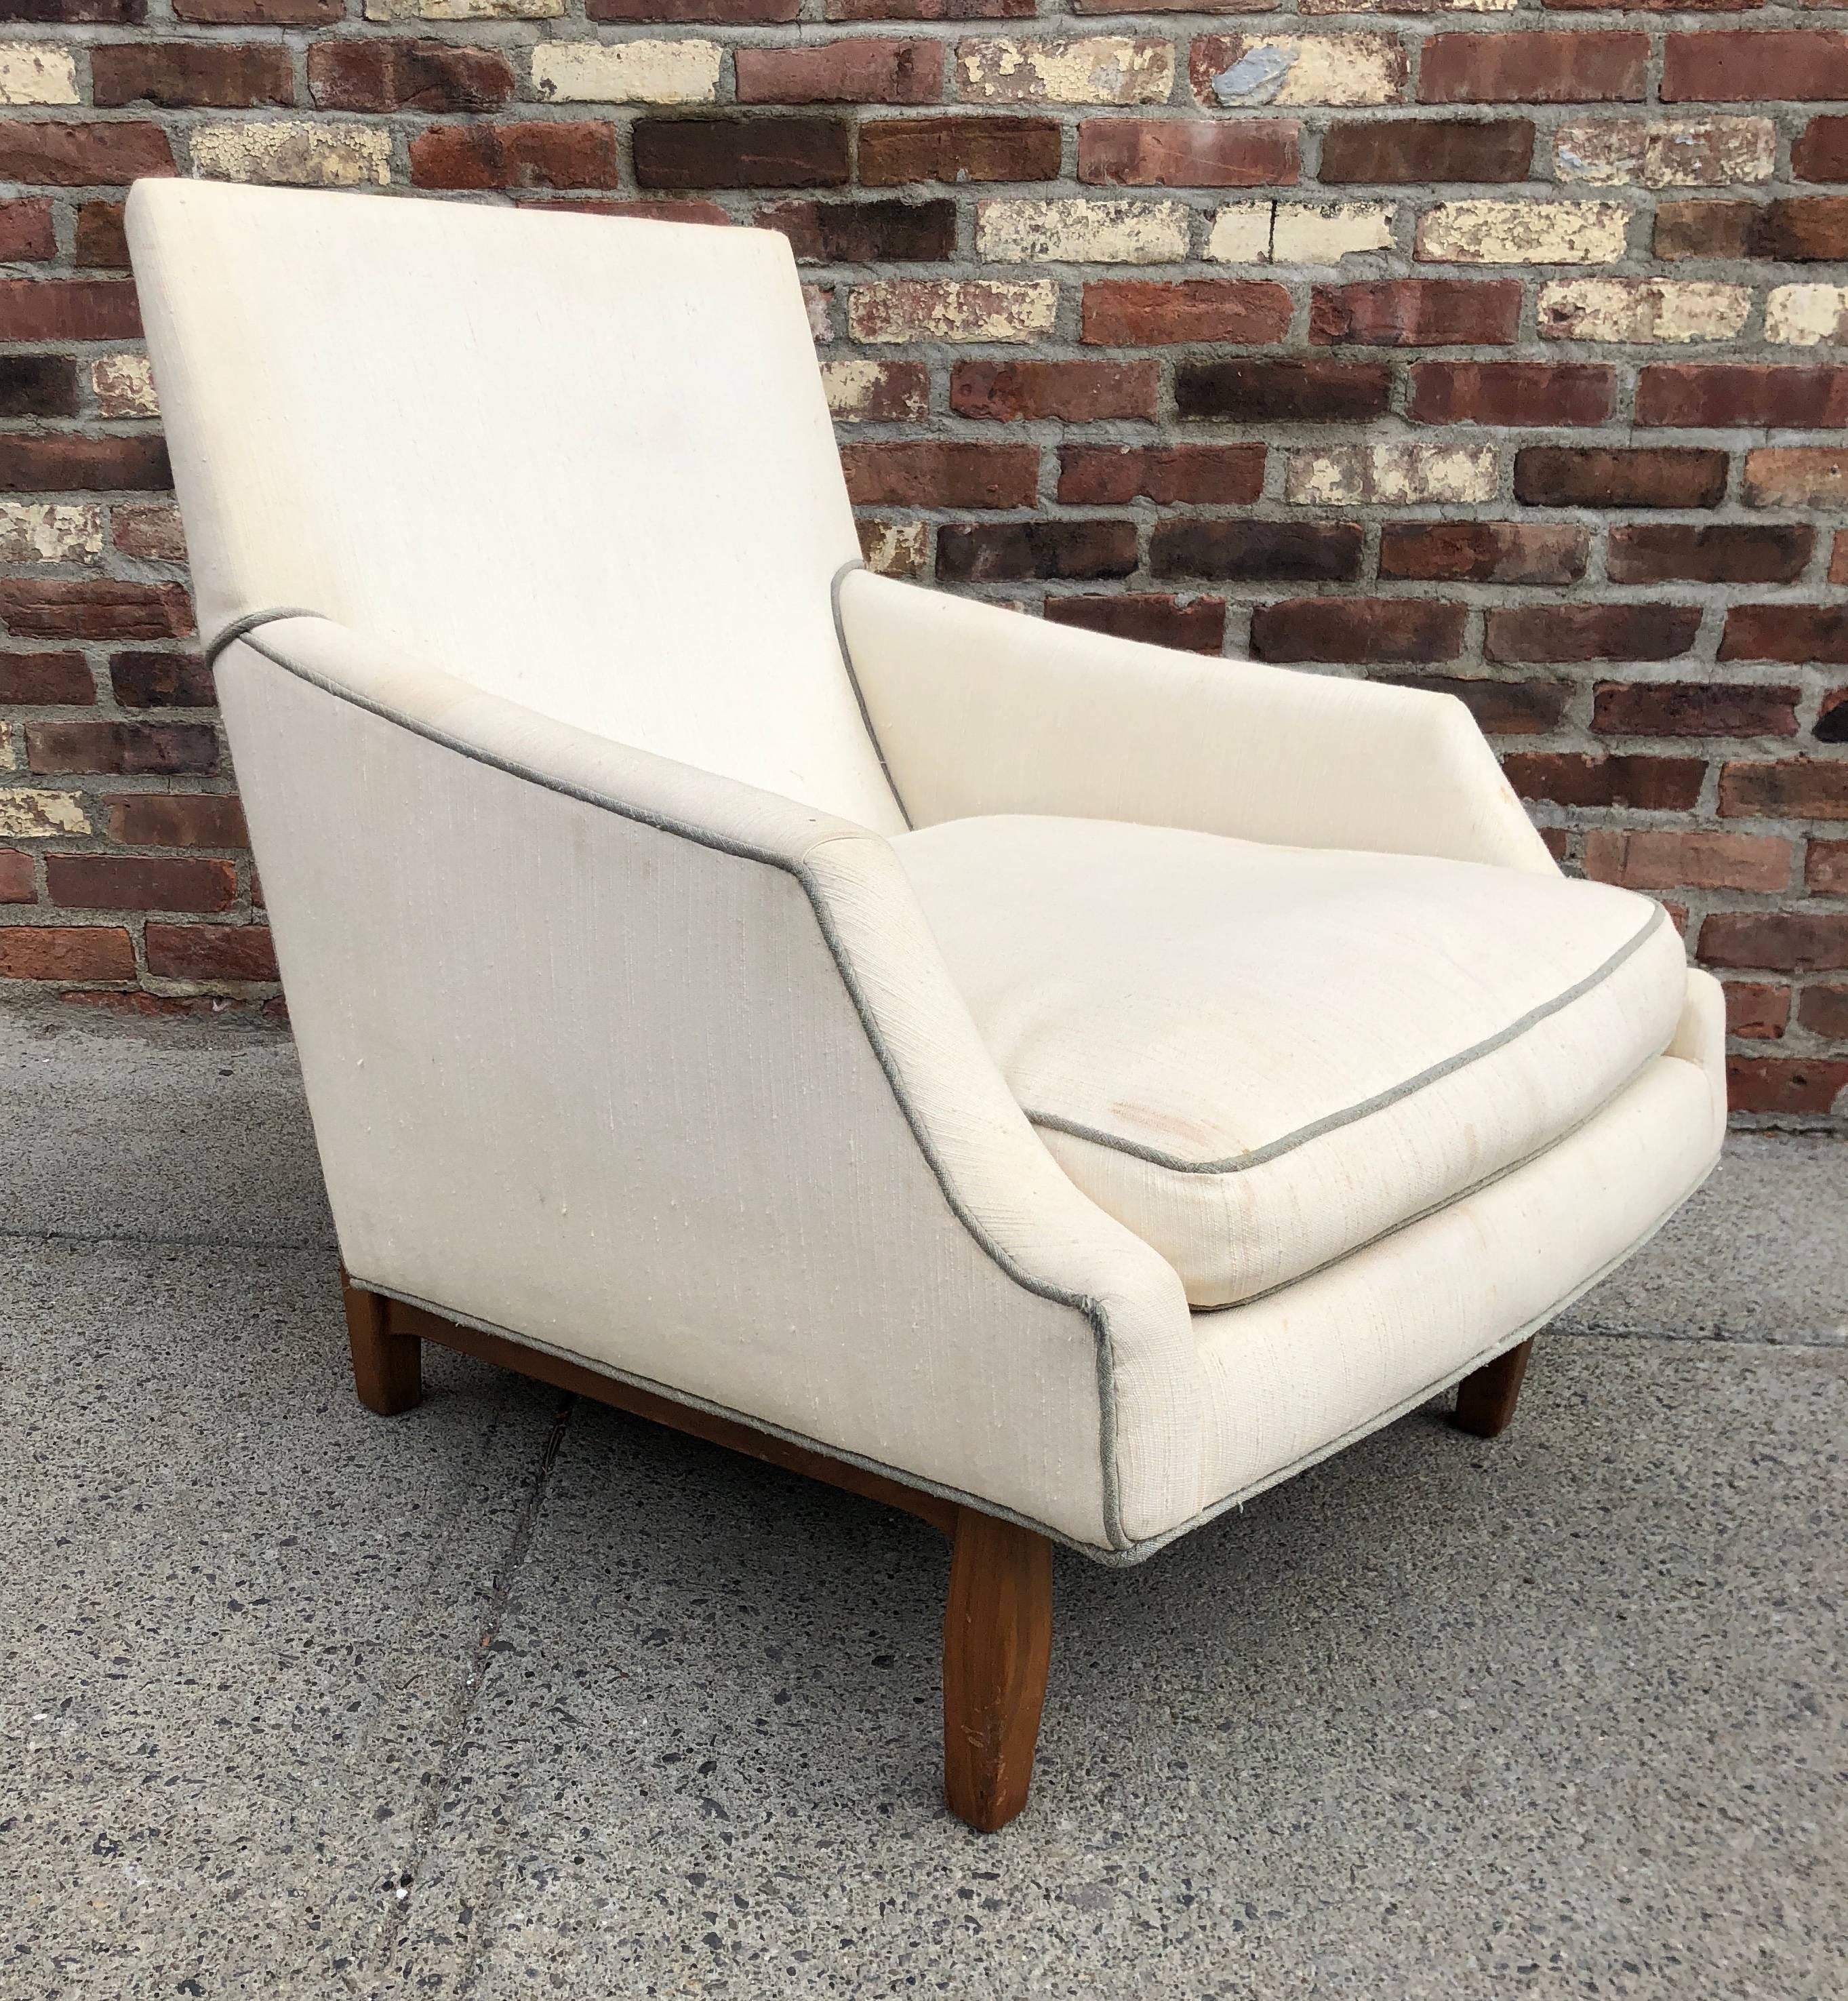 High back lounge chair with crisply tailored angled seat on sculpted walnut legs, circa 1950s. Unsigned but attributed to Dunbar Furniture.